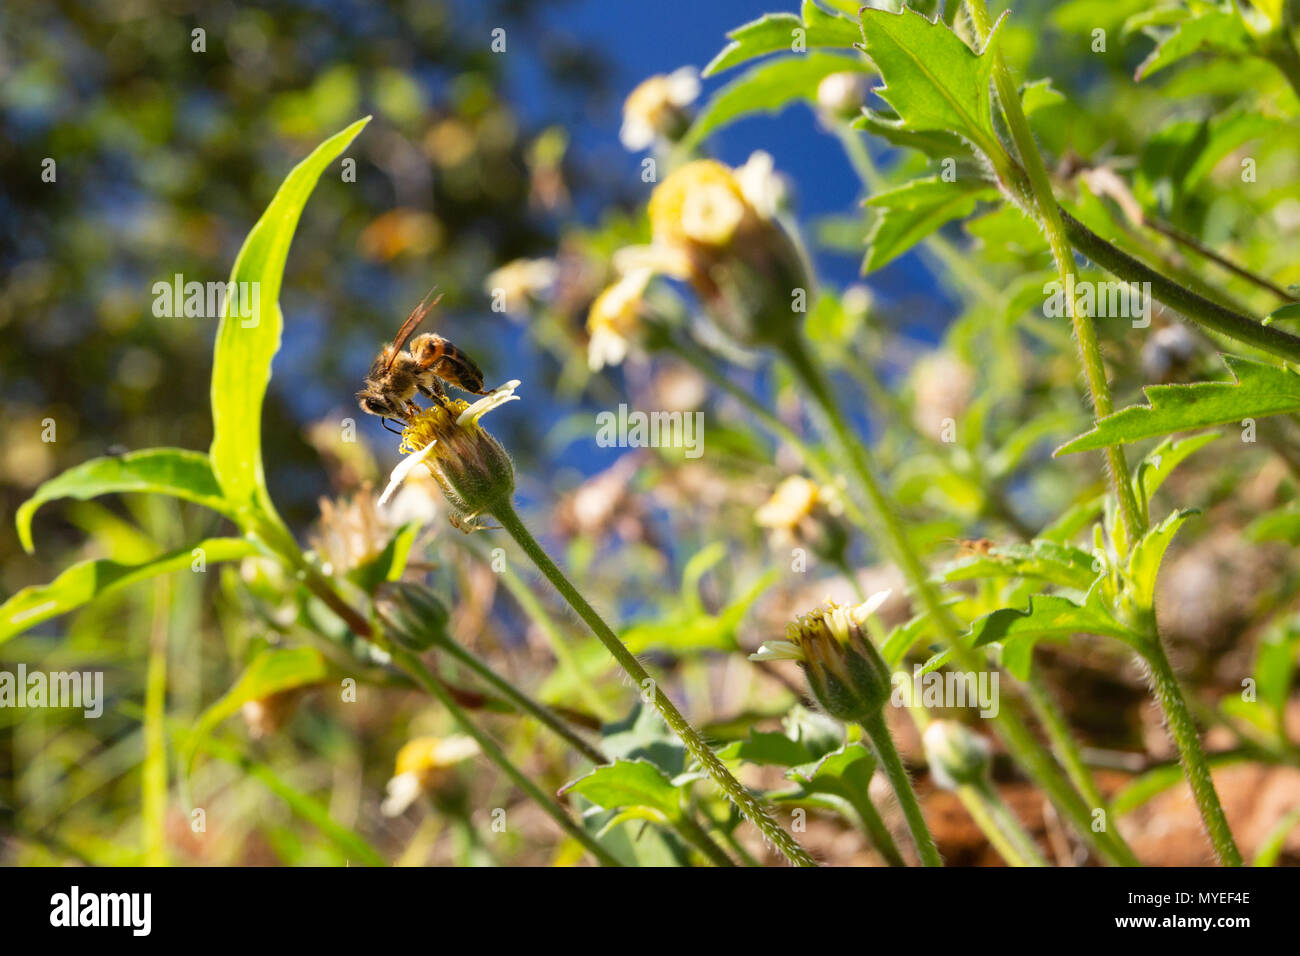 Asuncion, Paraguay. 7th Jun, 2018. A honey bee (Apis mellifera) feeds the nectar of tridax daisy or coatbuttons (Tridax procumbens) blooming flowers in a wildflower meadow during a sunny and pleasant afternoon with temperatures high around 19°C in Asuncion, Paraguay. Credit: Andre M. Chang/ARDUOPRESS/Alamy Live News Stock Photo